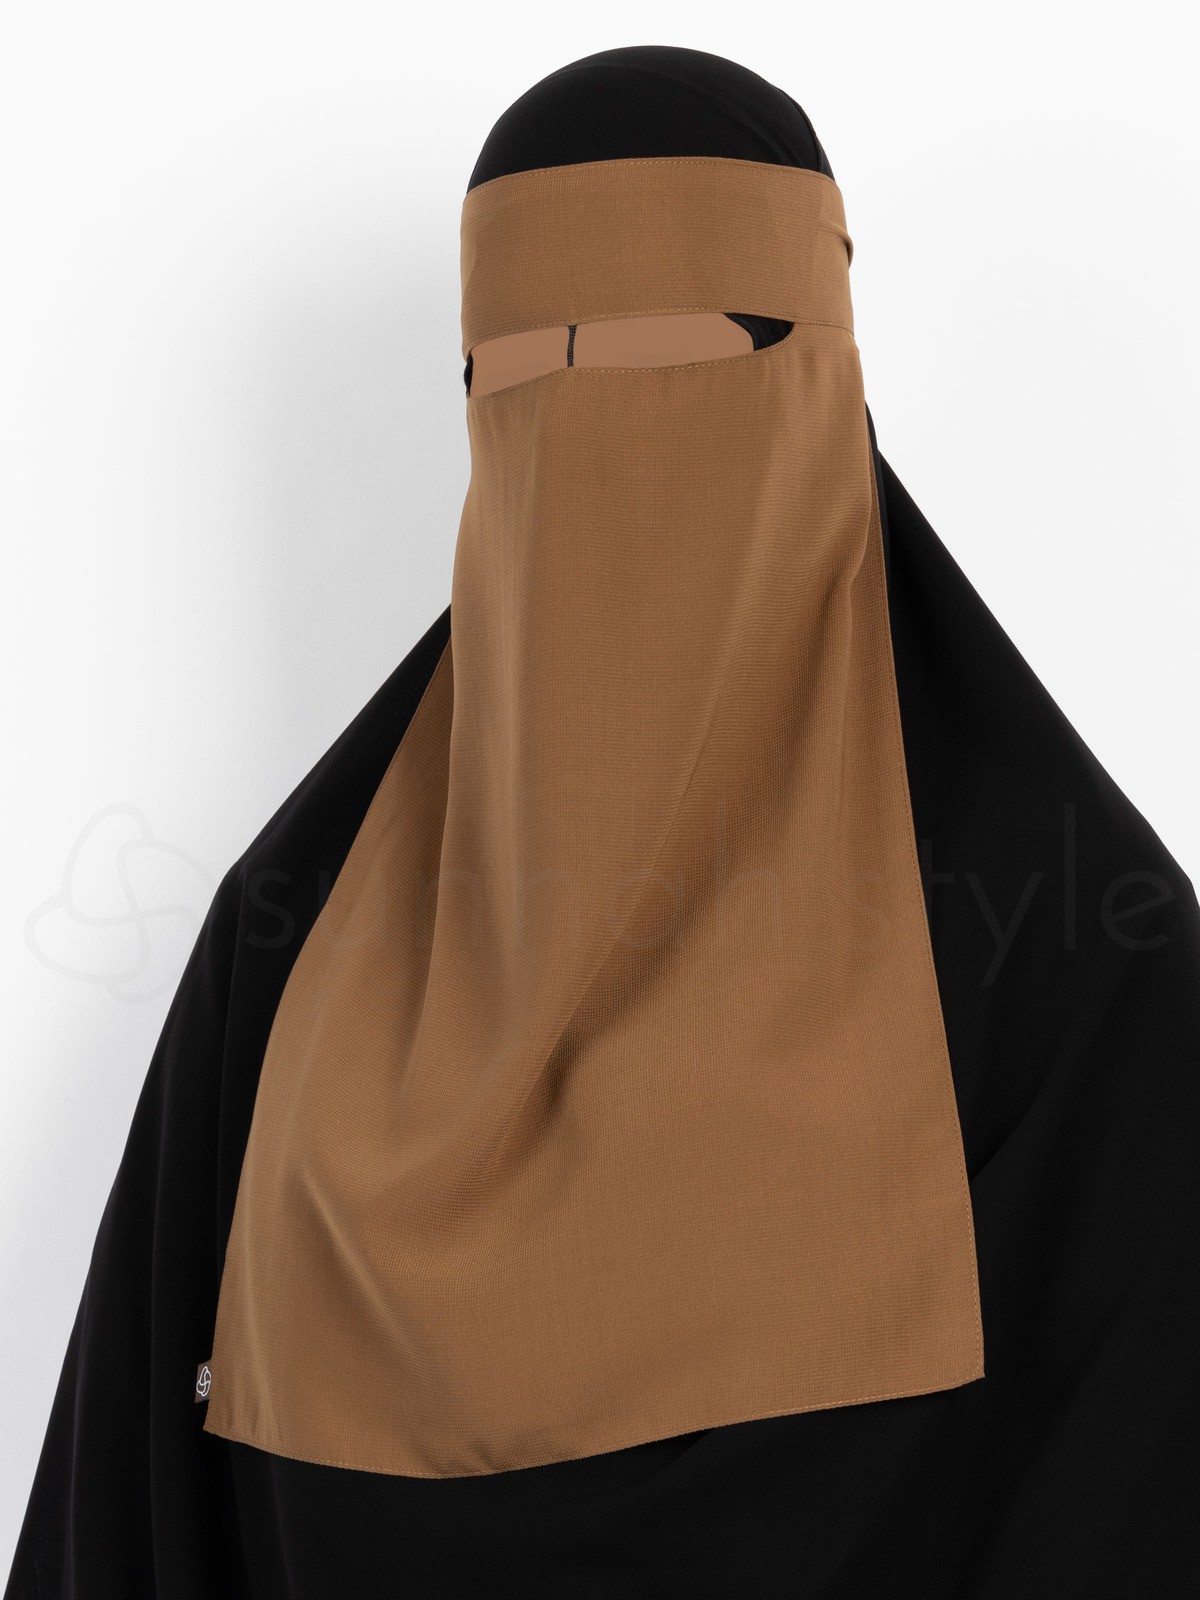 Sunnah Style - One Layer Niqab /w Nose String (Teal)